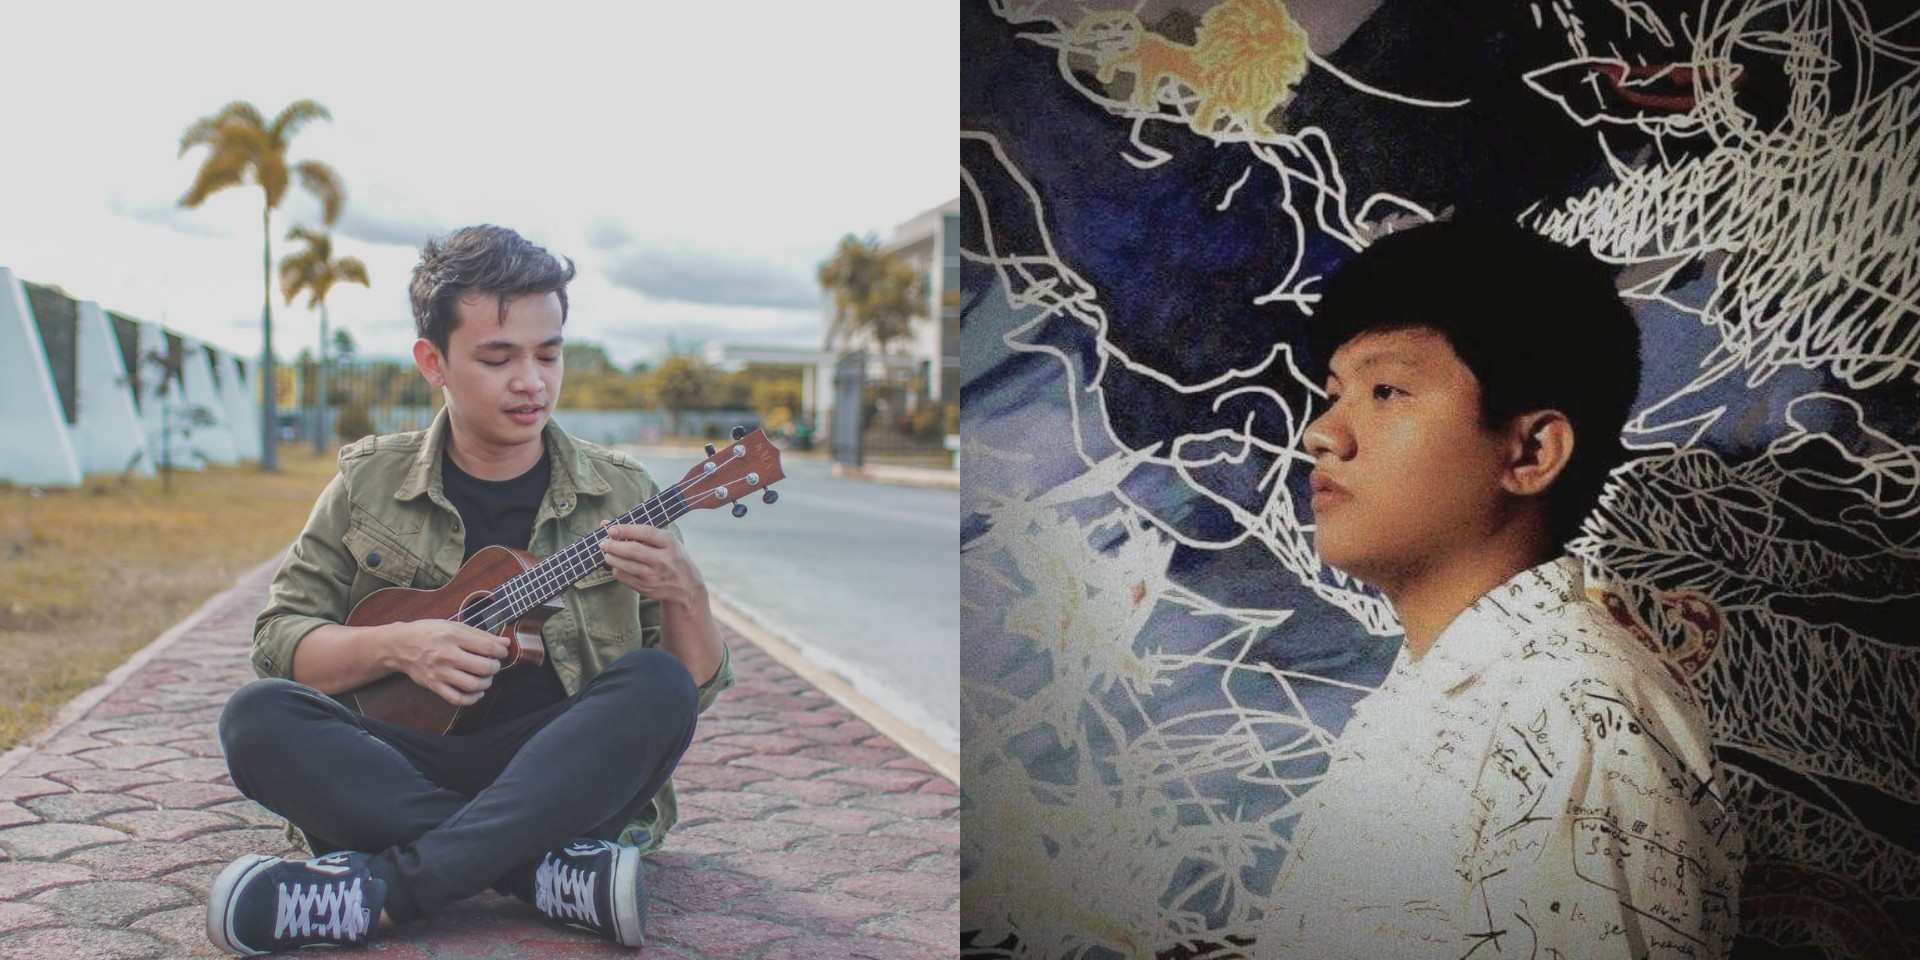 Regional standouts Chud Festejo and Ferdinand Aragon to release new music at joint launch